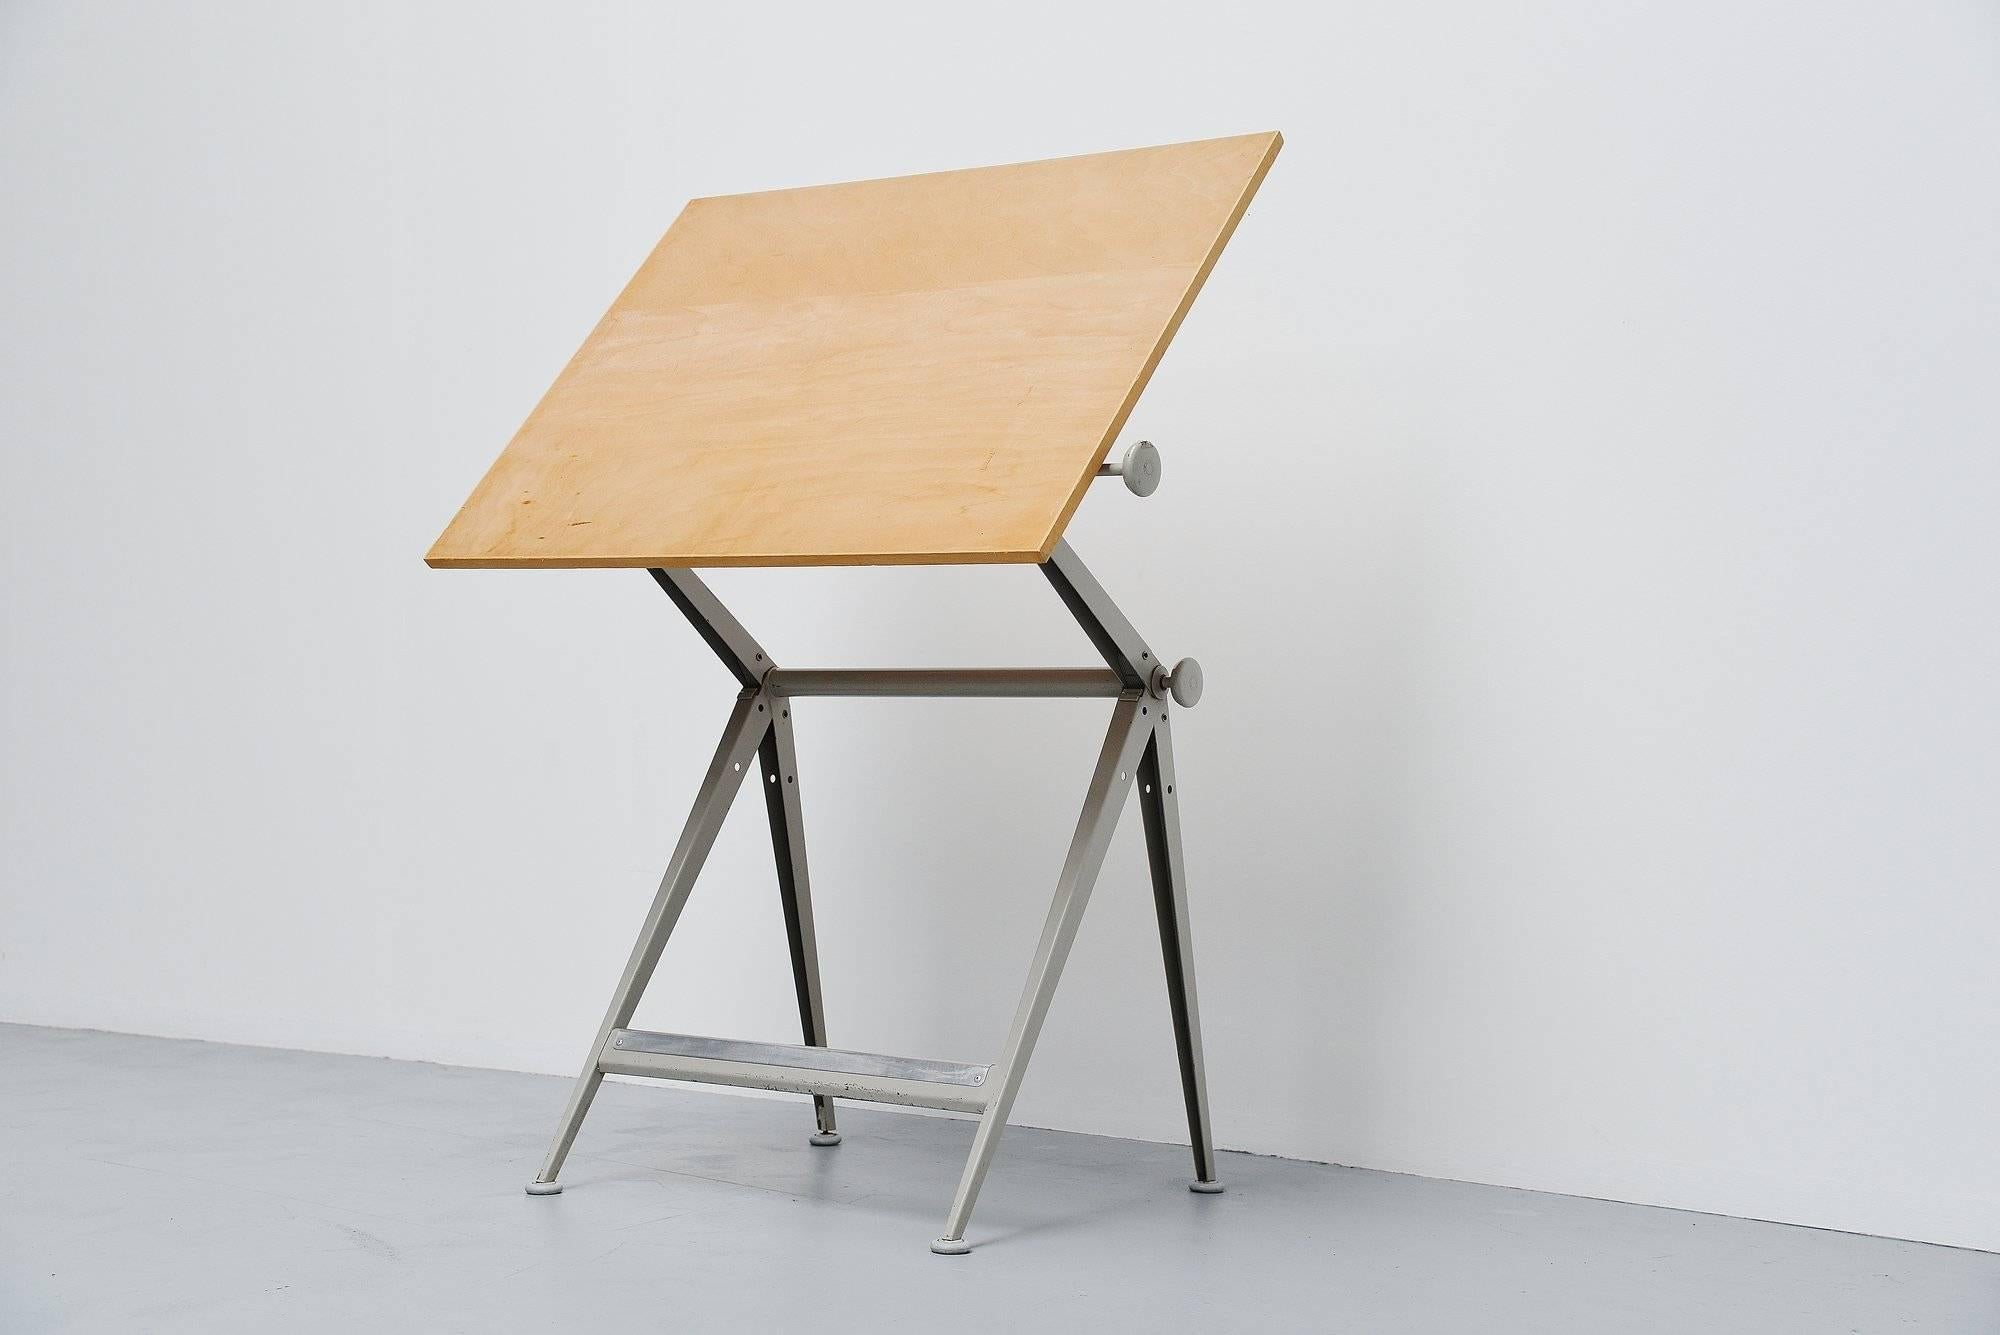 Ingenious 'Reply' drafting table designed by Wim Rietveld and Friso Kramer for Ahrend de Cirkel, Holland 1963. The table is adjustable in numerous positions using an ingenious adjusting system using only two screws at the side. This table won a